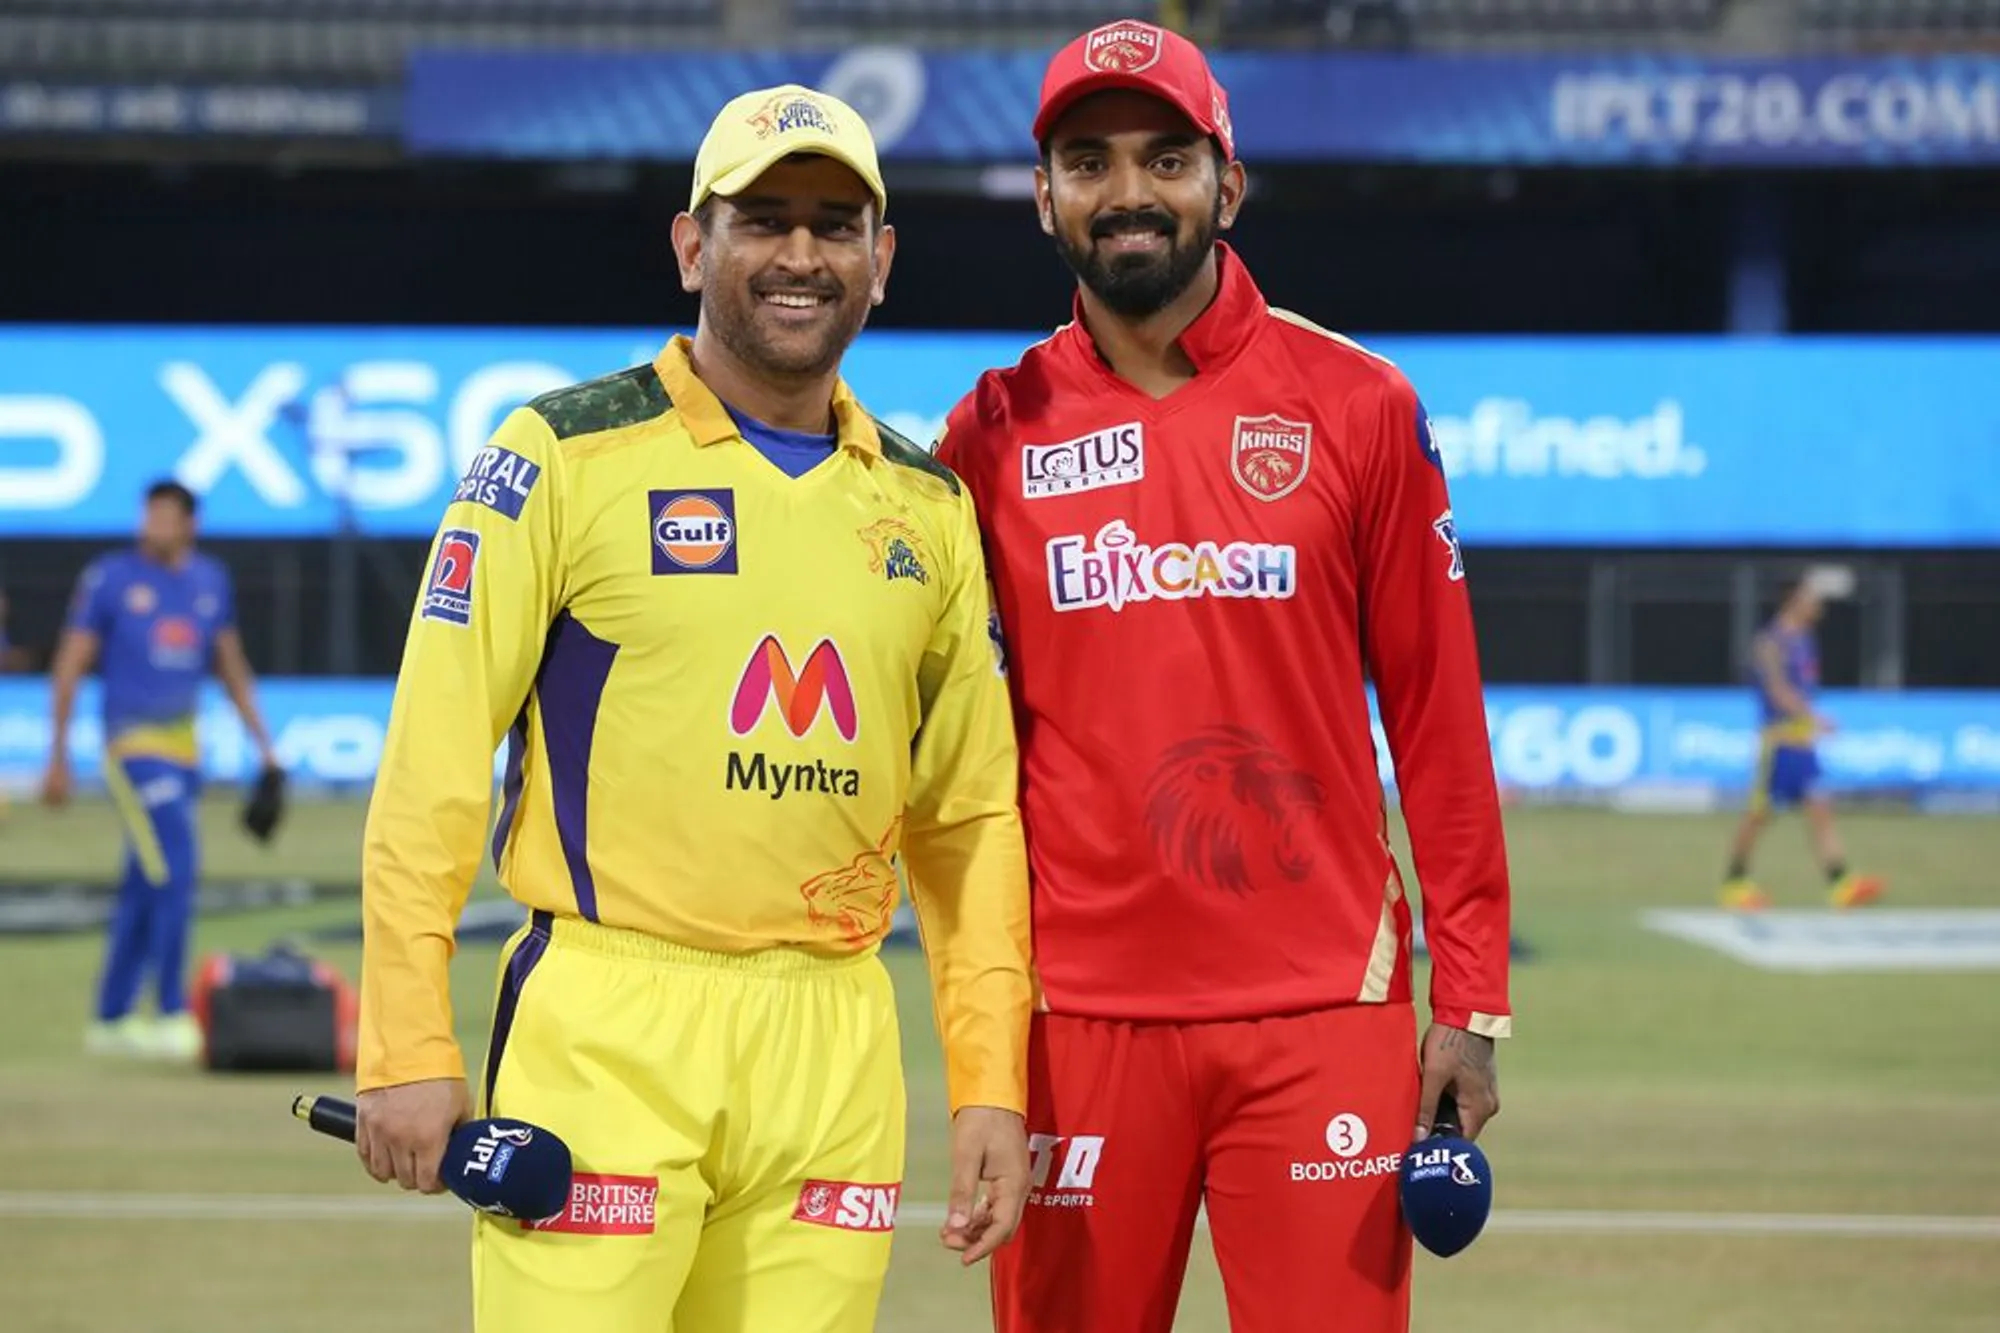 PBKS lost to CSK in their previous match of the IPL 2021 | BCCI-IPL